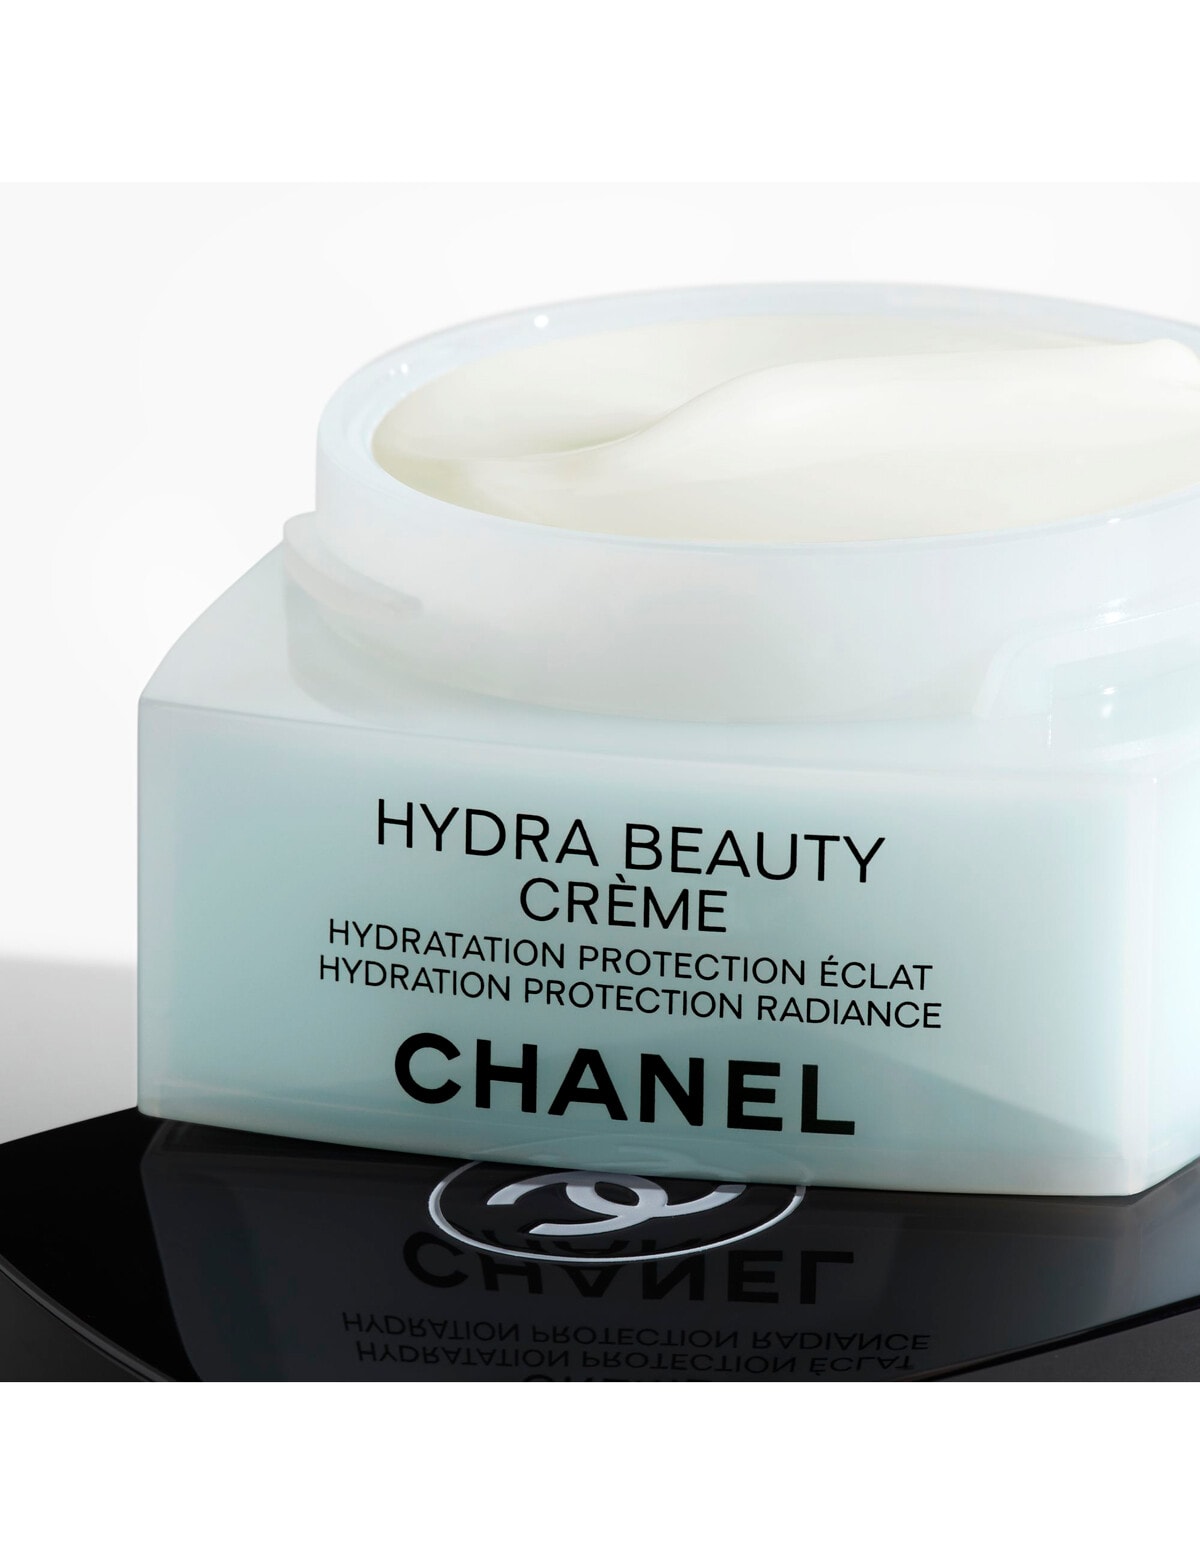 CHANEL HYDRA BEAUTY CRÈME Hydration Protection Radiance 50g